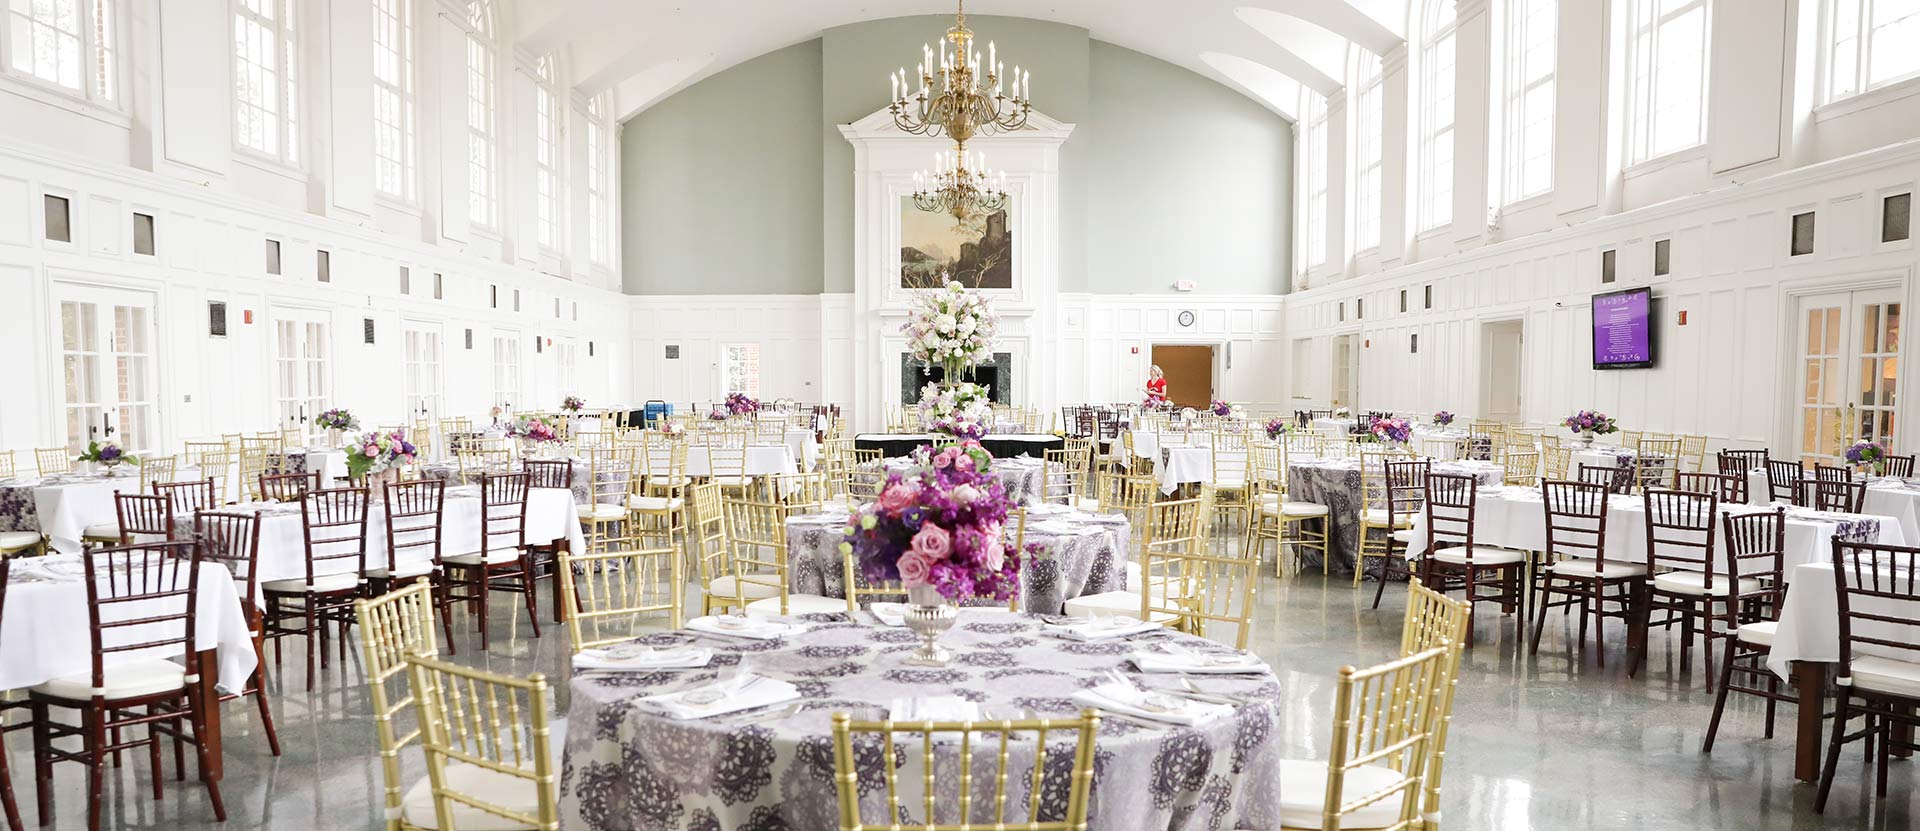 Dining Hall with chandeliers and tablecloths on the tables